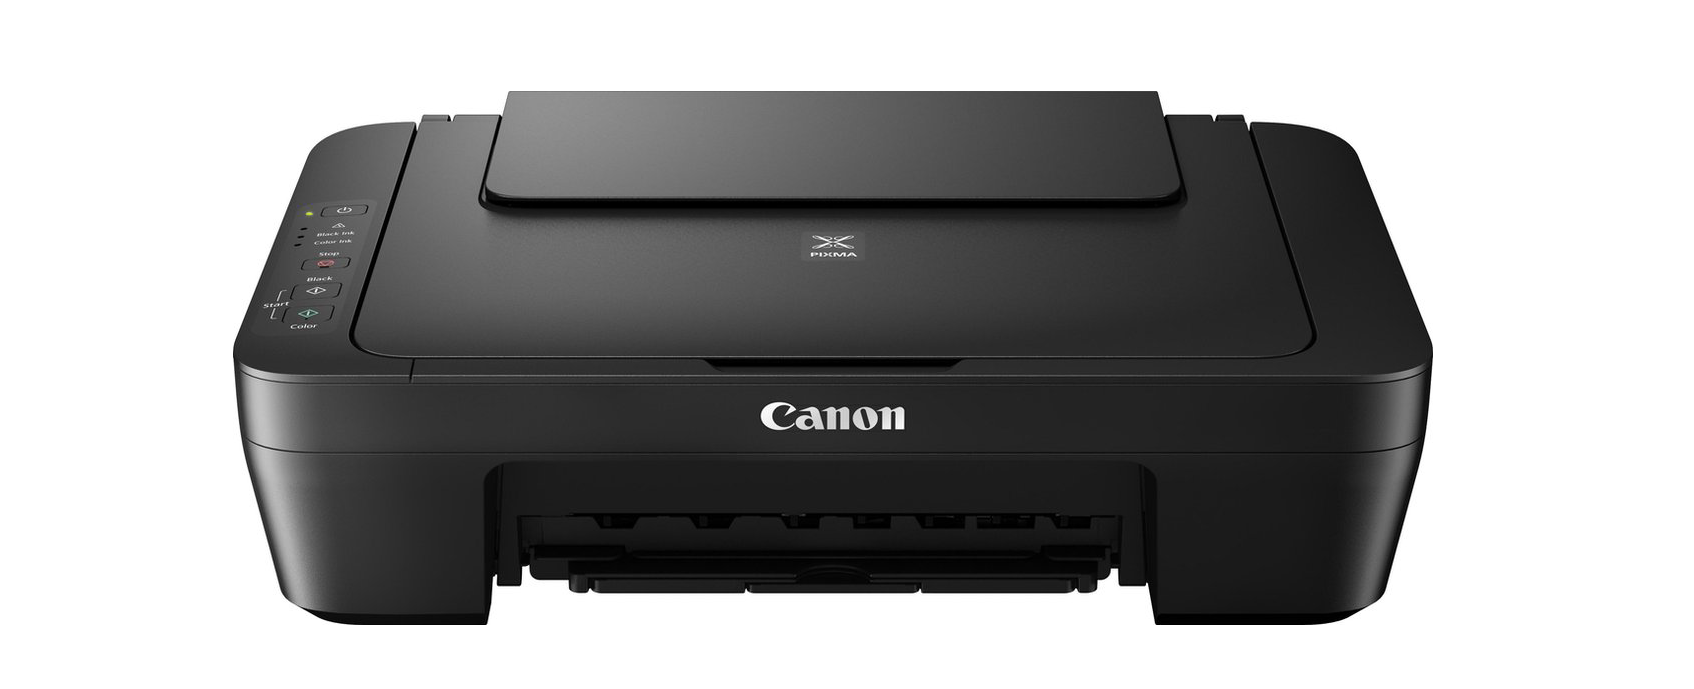 Canon Pixma Mg2555s Printer All In One Zwart Usb Kabel Aansluiting Ag Store 5580